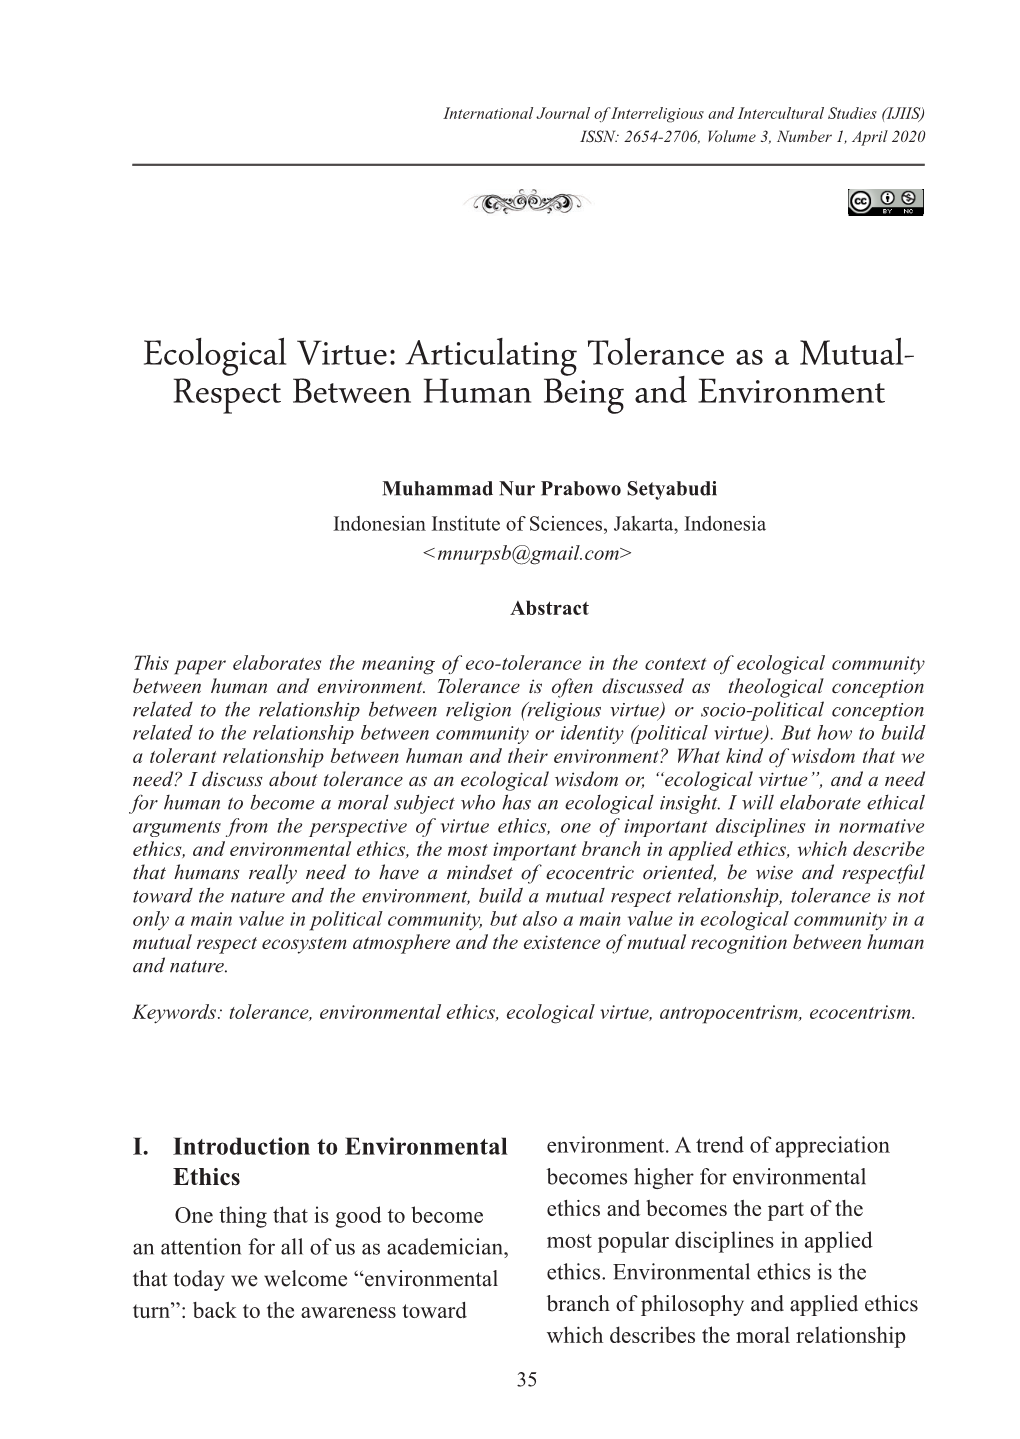 Ecological Virtue: Articulating Tolerance As a Mutual- Respect Between Human Being and Environment